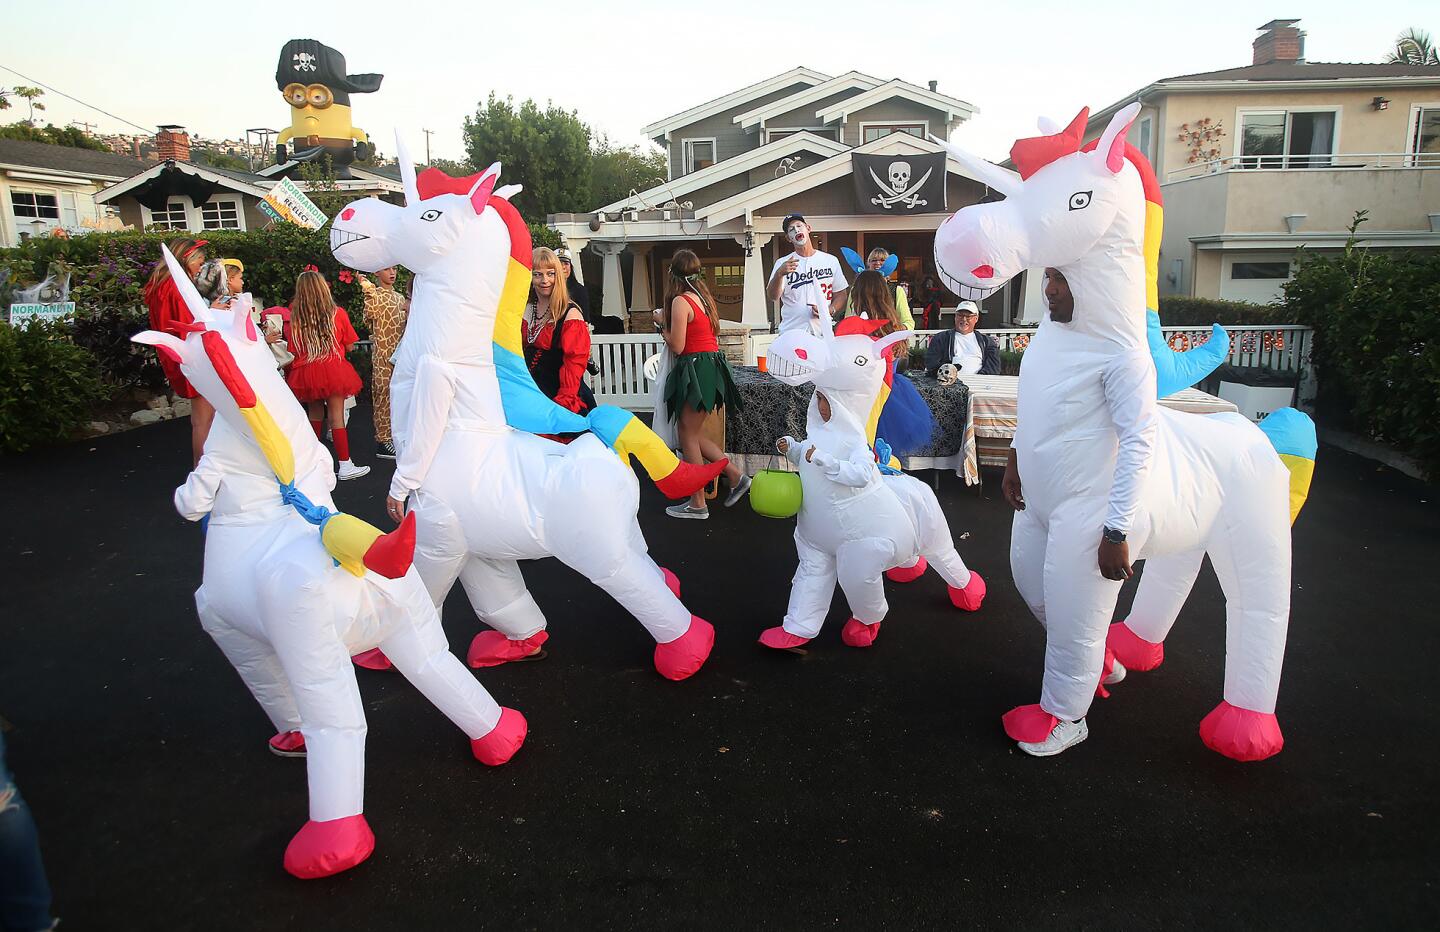 Dressed as unicorns, members of the Zaki family walk during the annual Oak Street Halloween block party and costume parade on Wednesday in Laguna Beach.